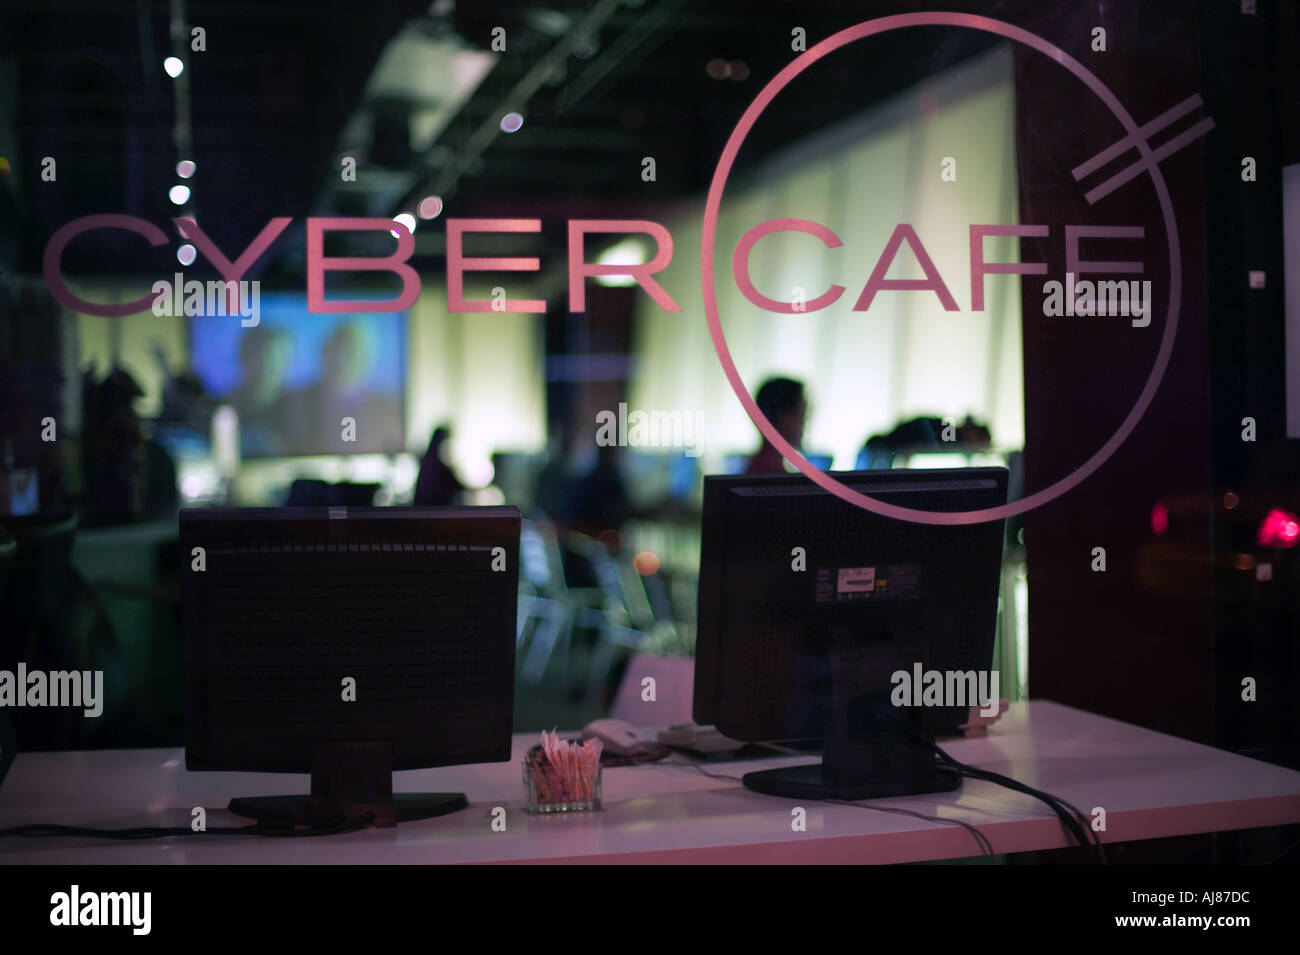 Cyber Cafe or internet cafe on 48th street in Midtown Manhattan New York NY Stock Photo